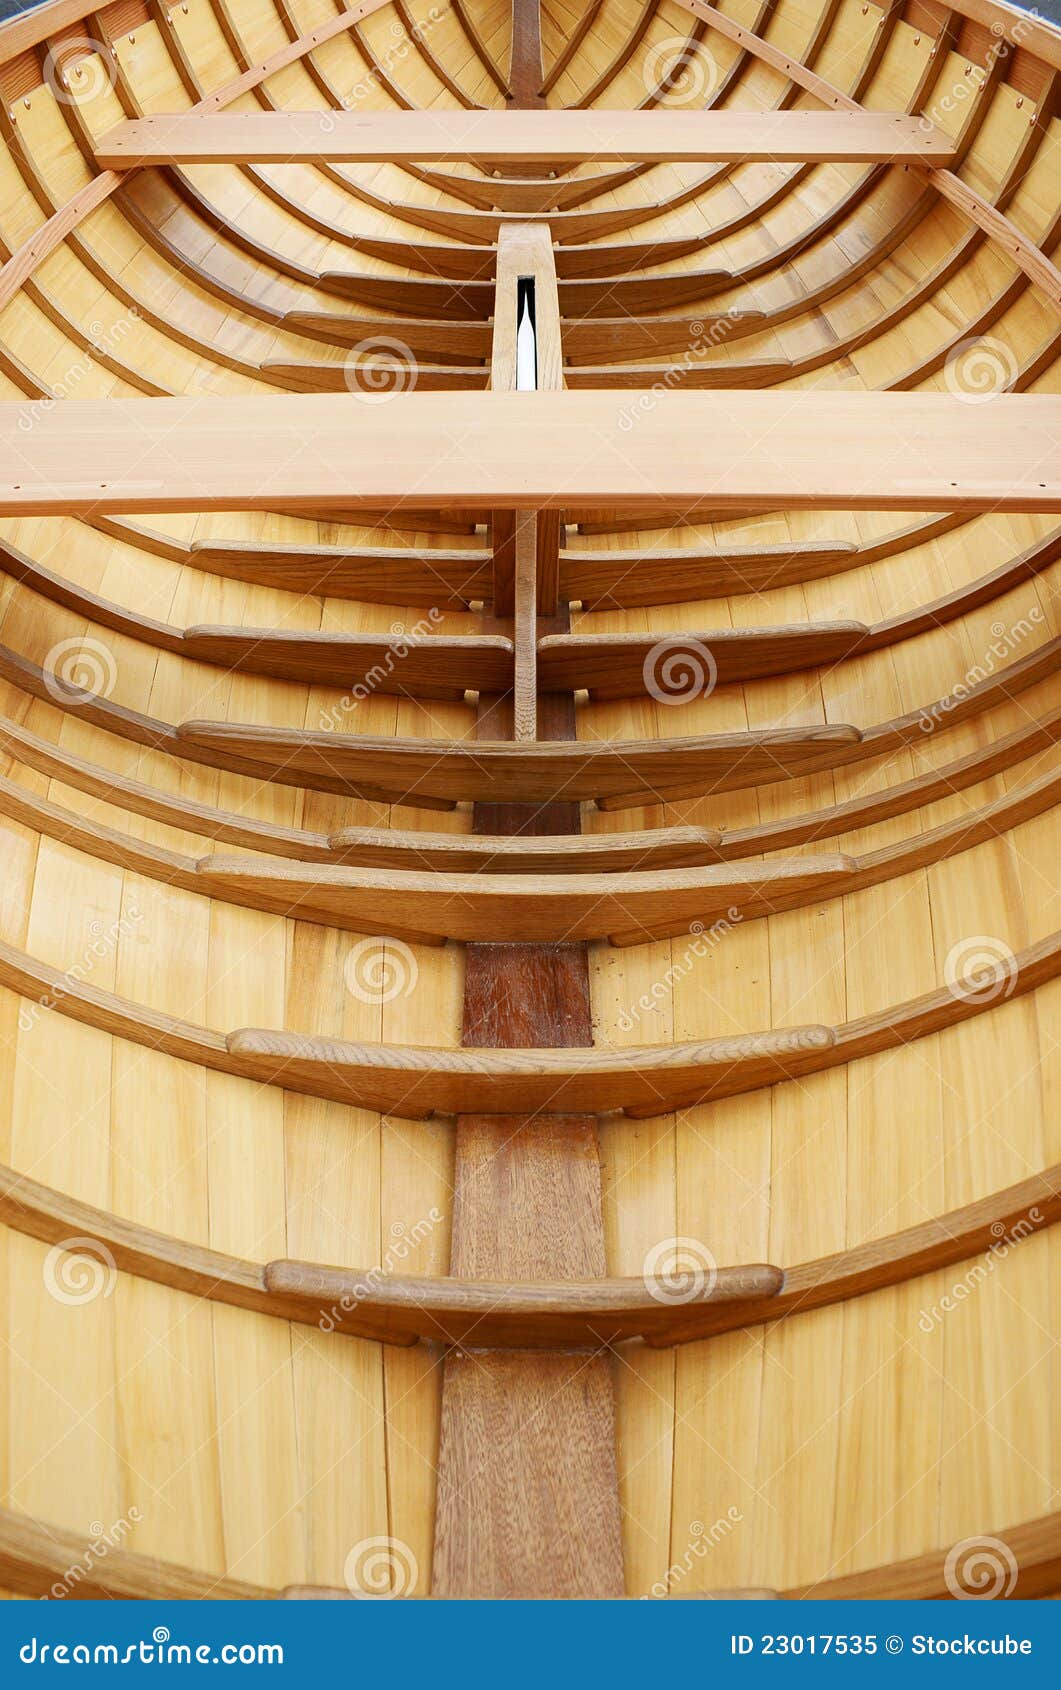 Beautiful Wooden Boat Under Construction Royalty Free Stock Photo 